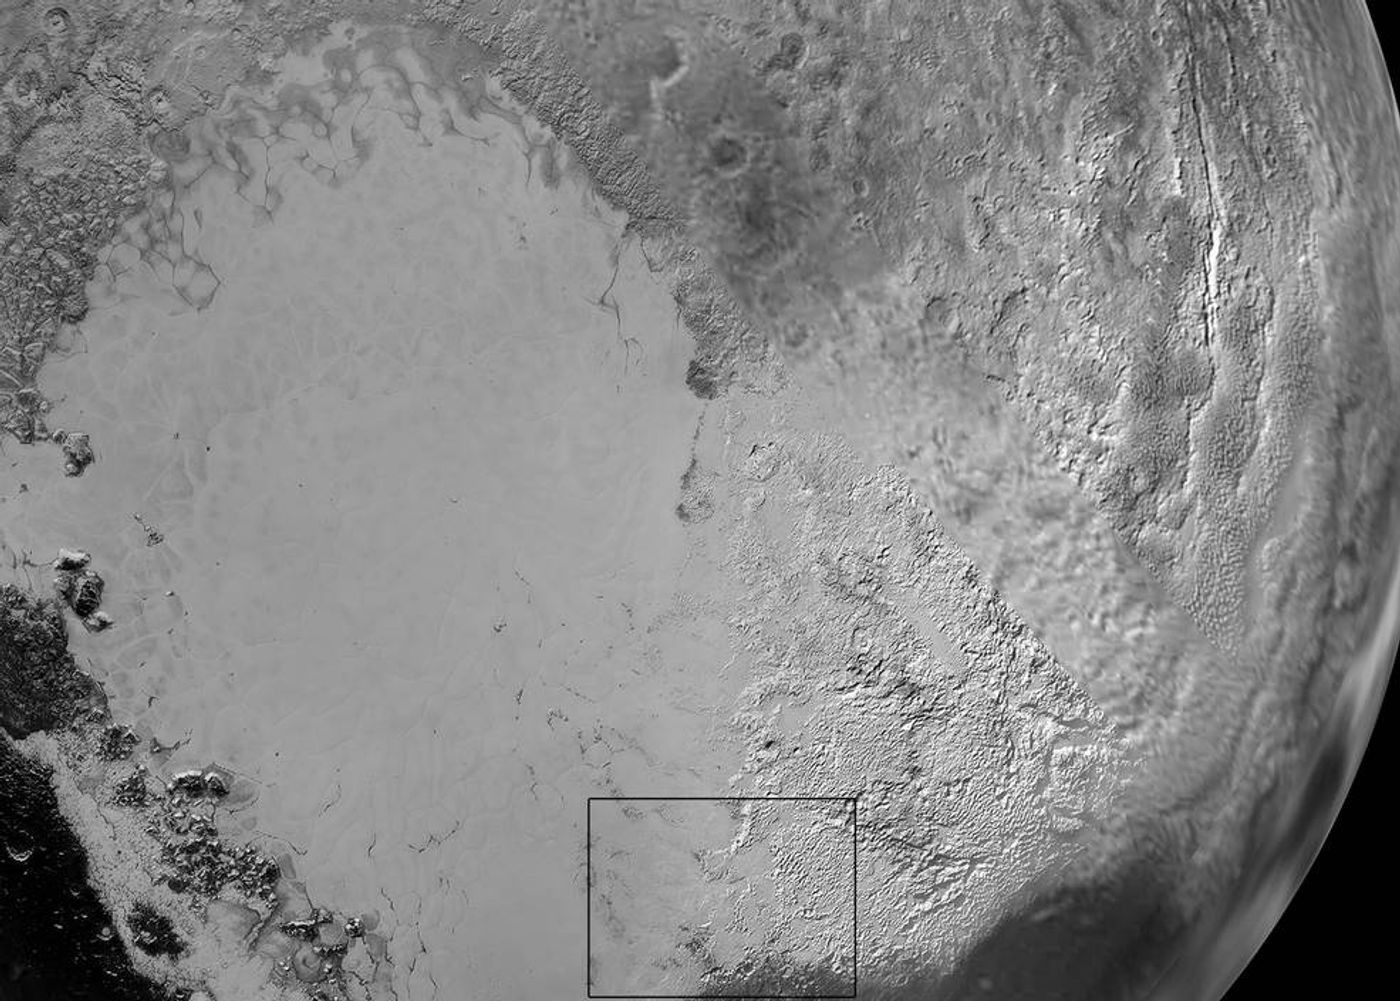 Here, we have a closer look at Pluto's 'heart,' which scientists believe is composed of frozen nitrogen.